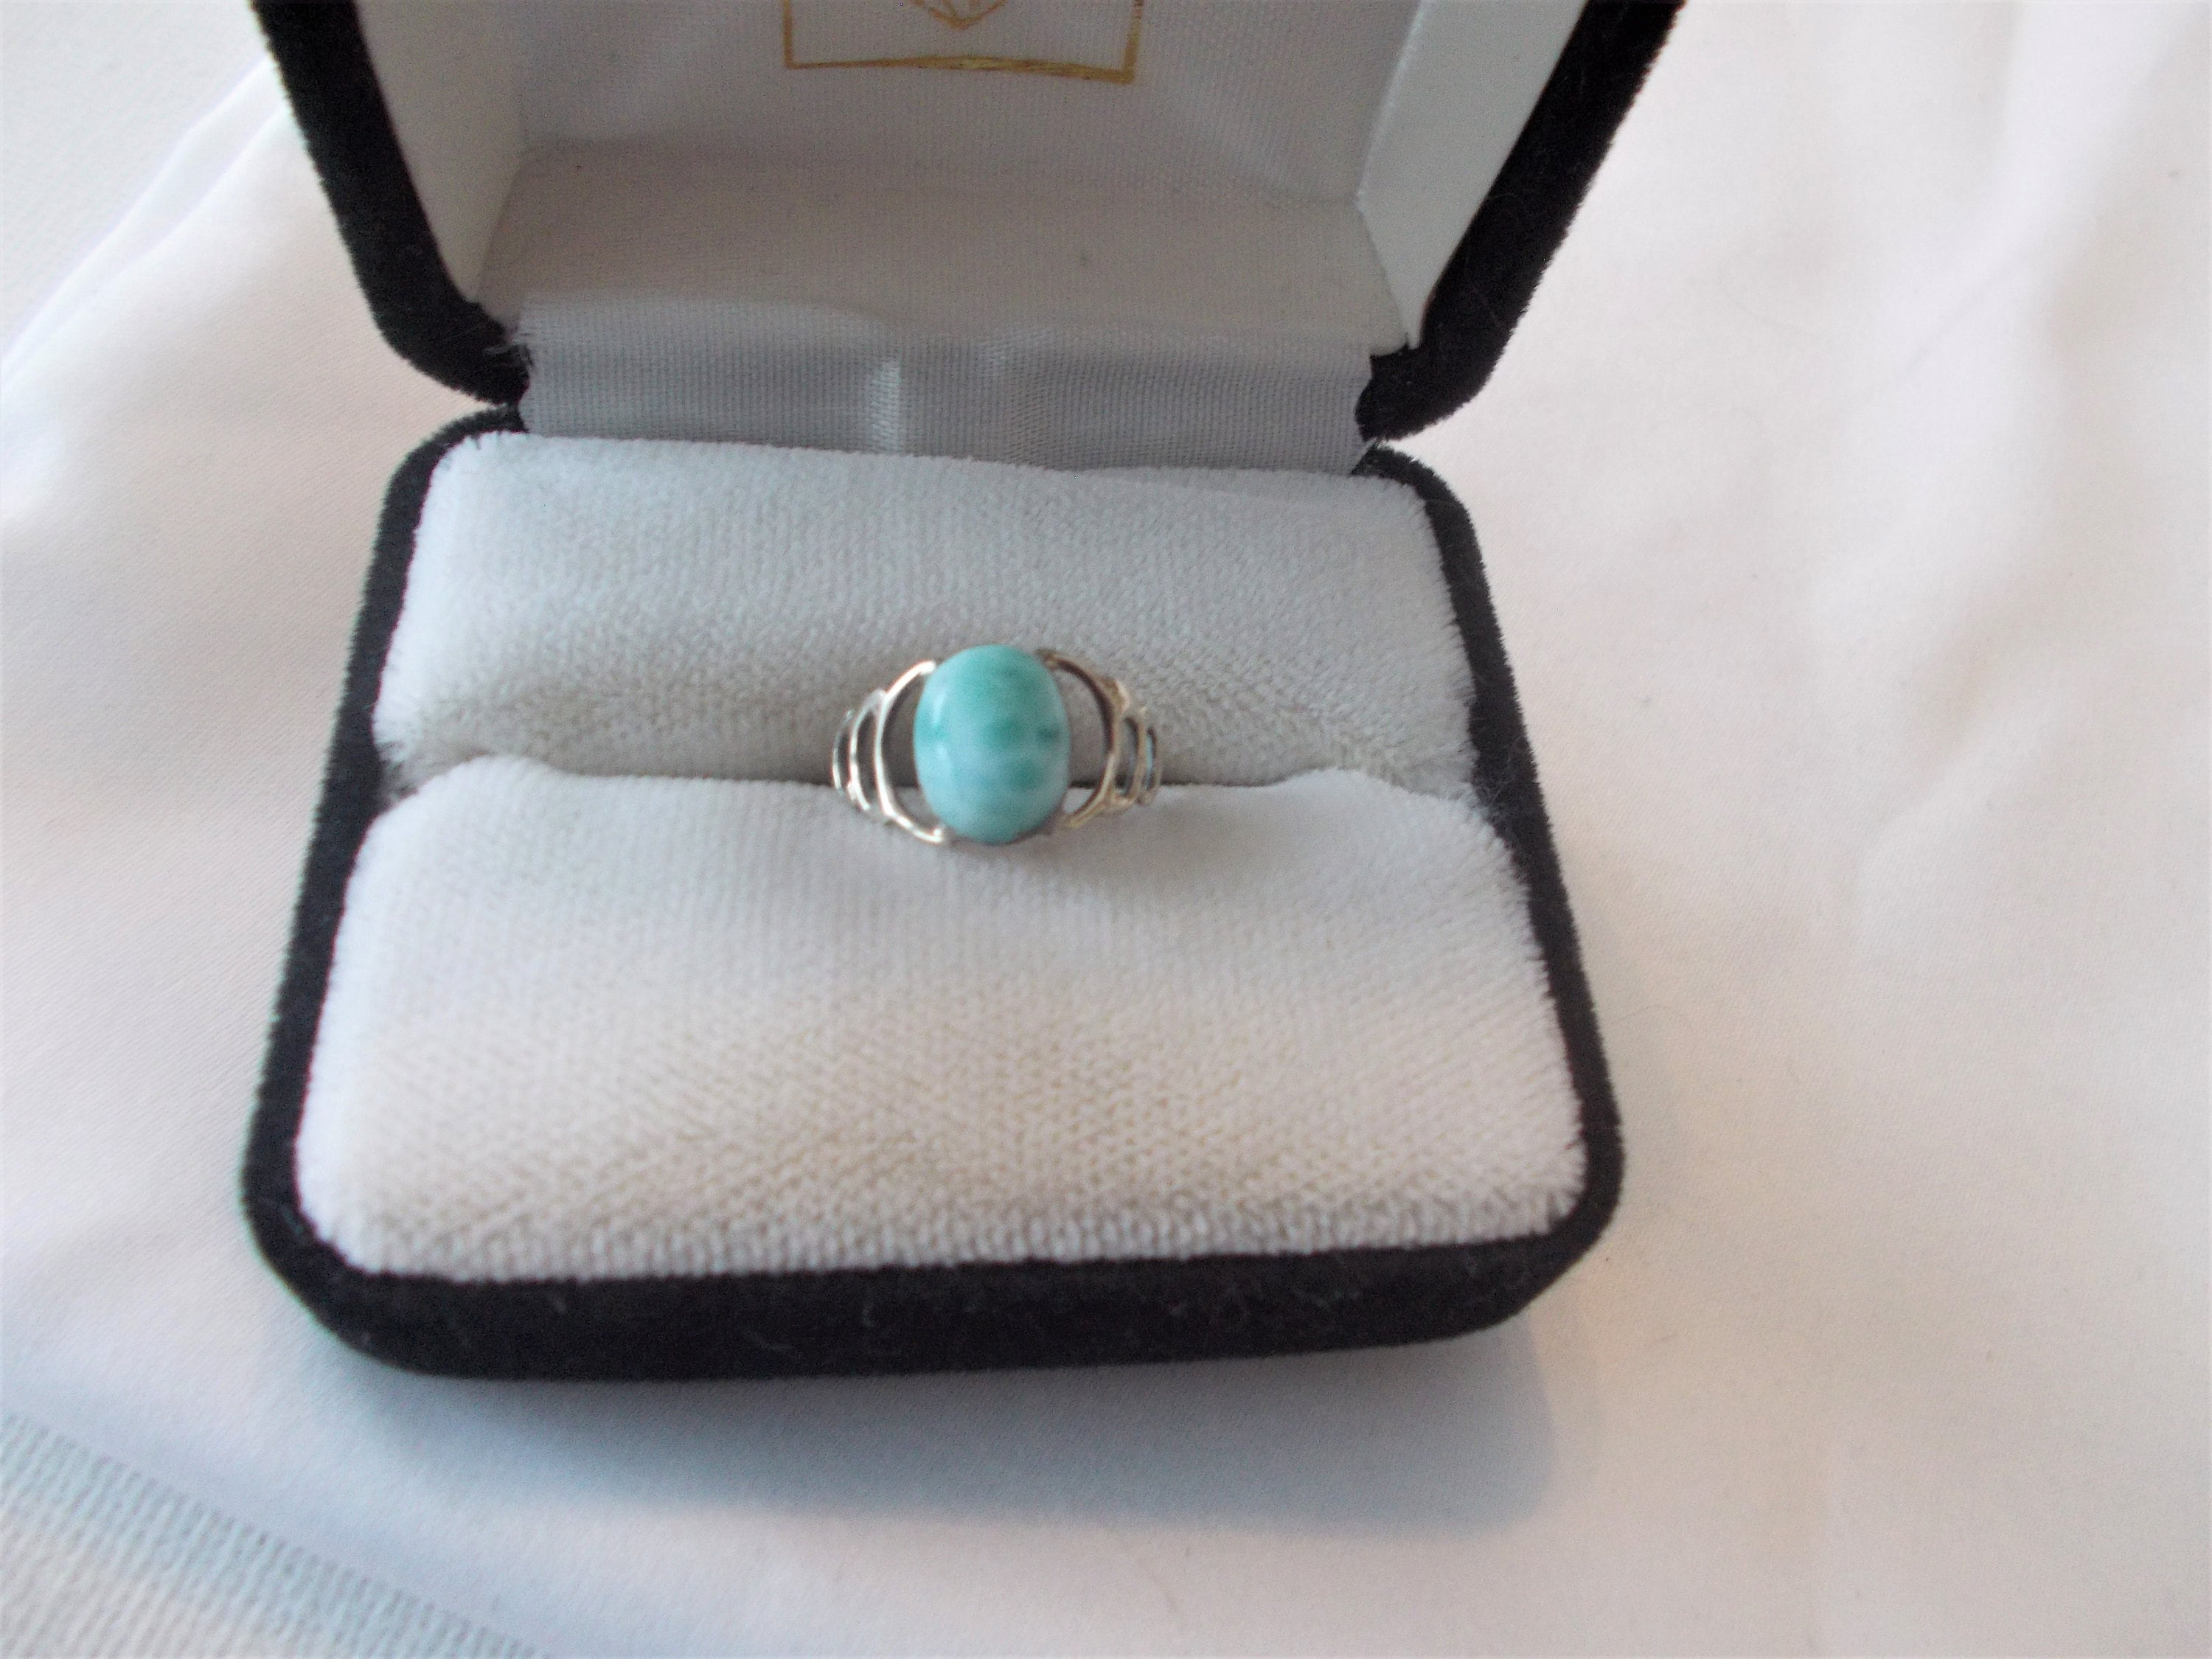 green stone Dainty ring vintage sterling silver size 1